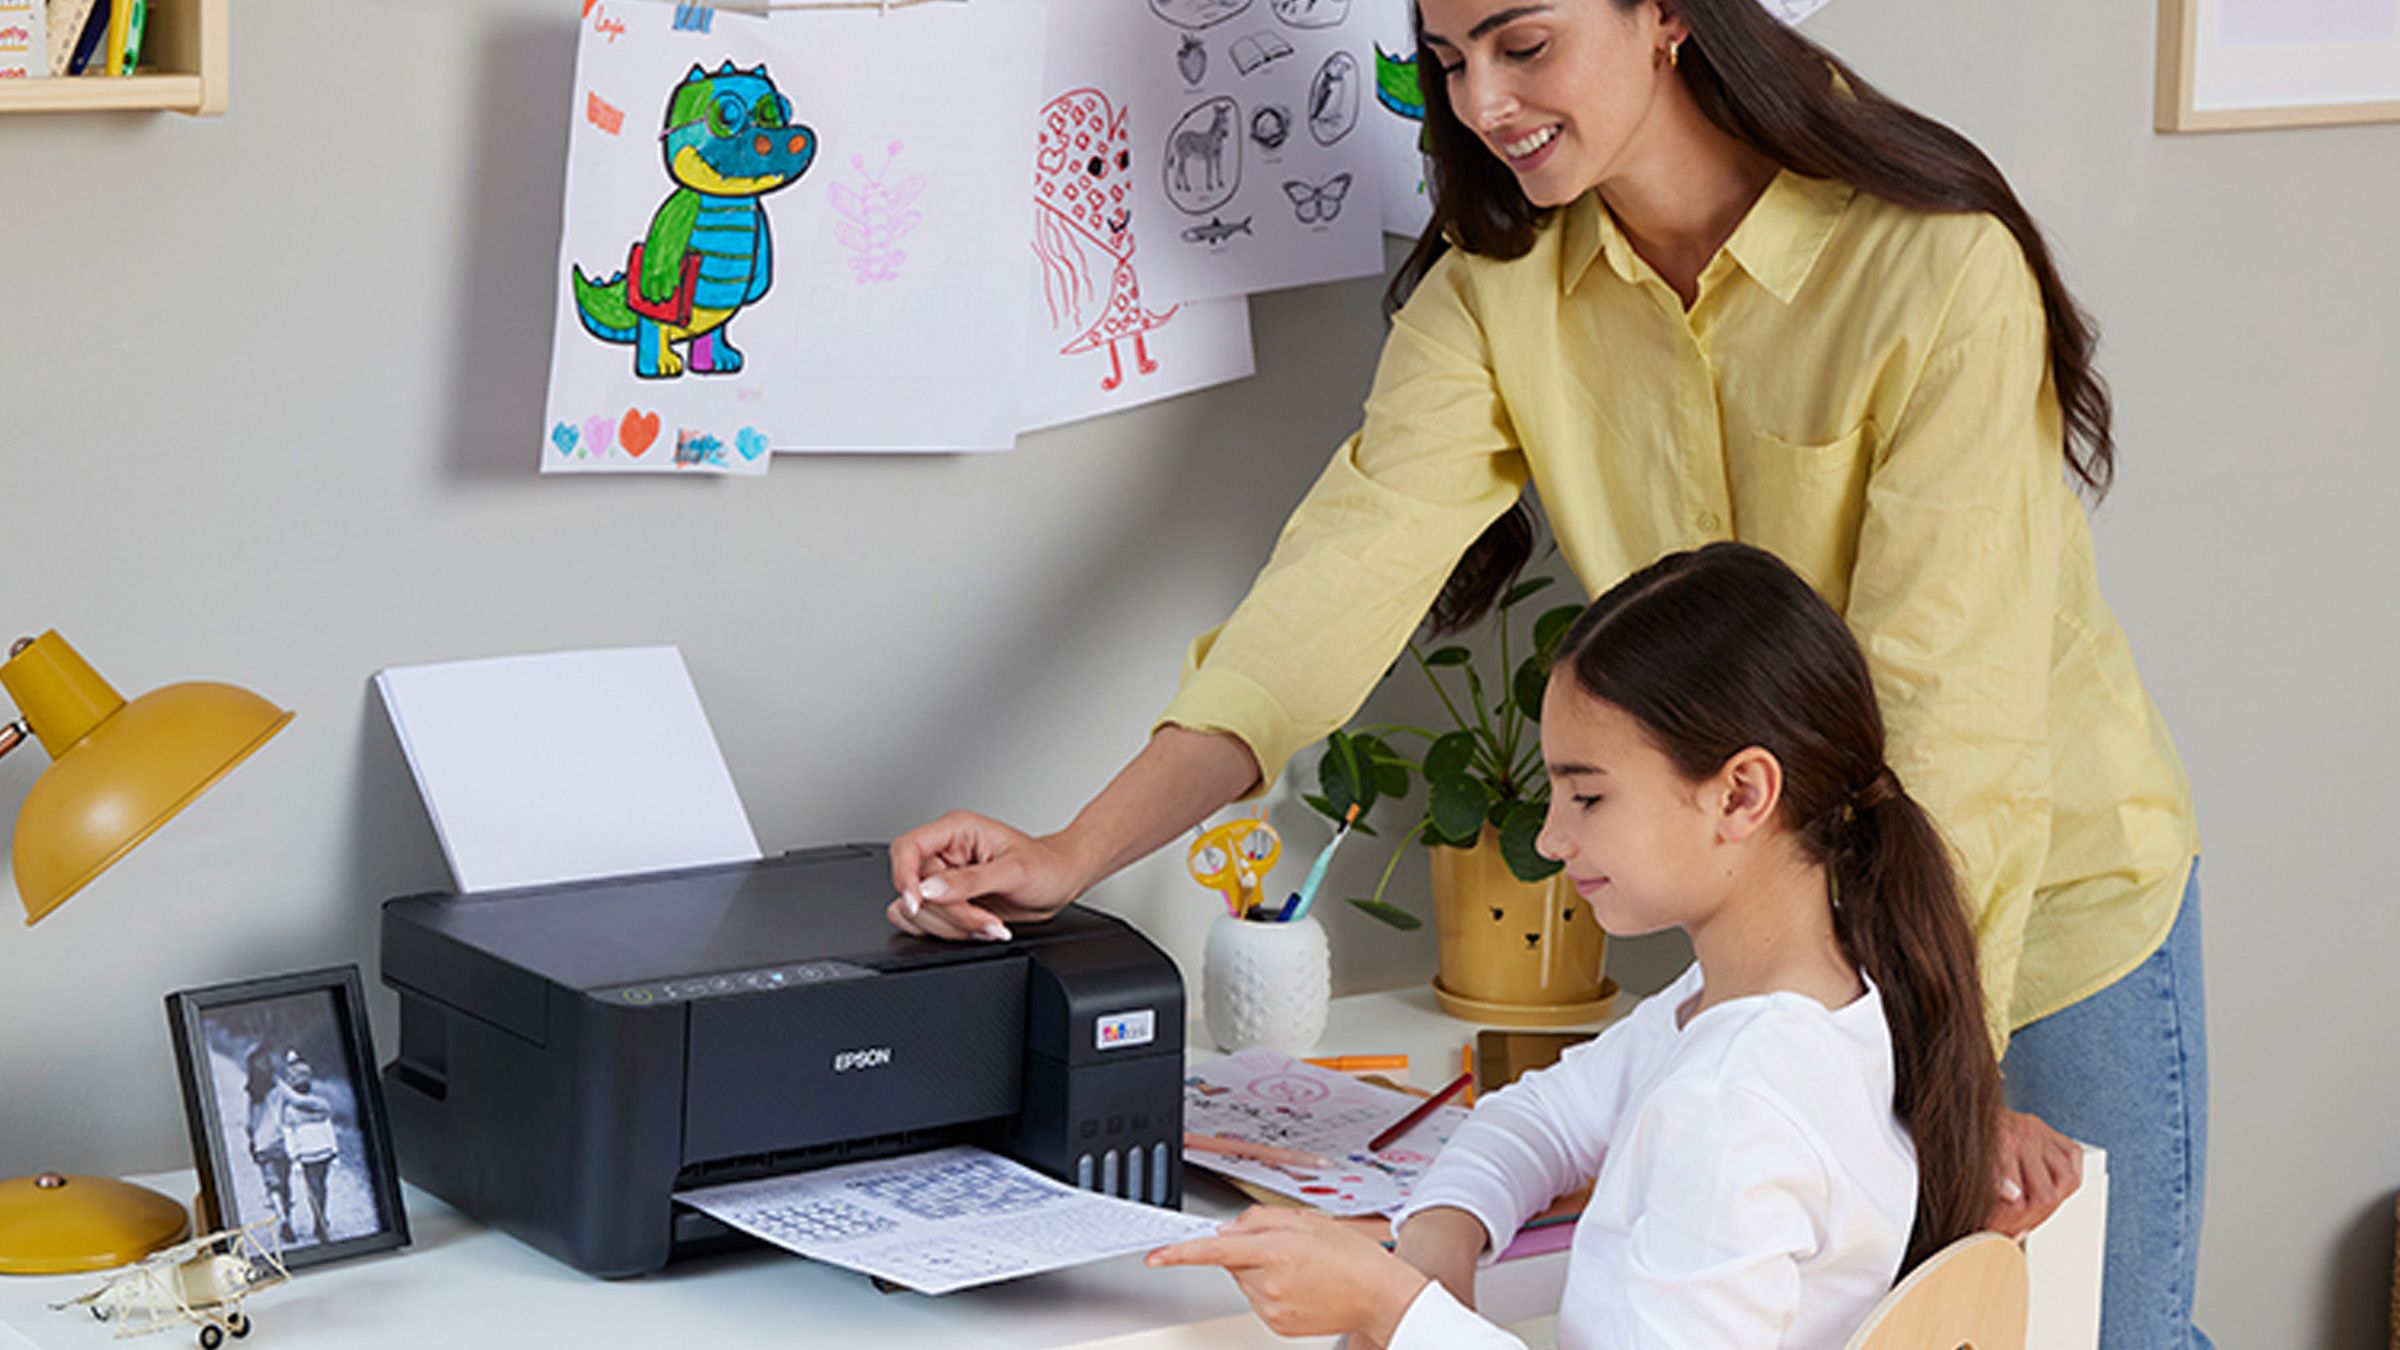 Mother and daughter smiling using a printer on a desk at home